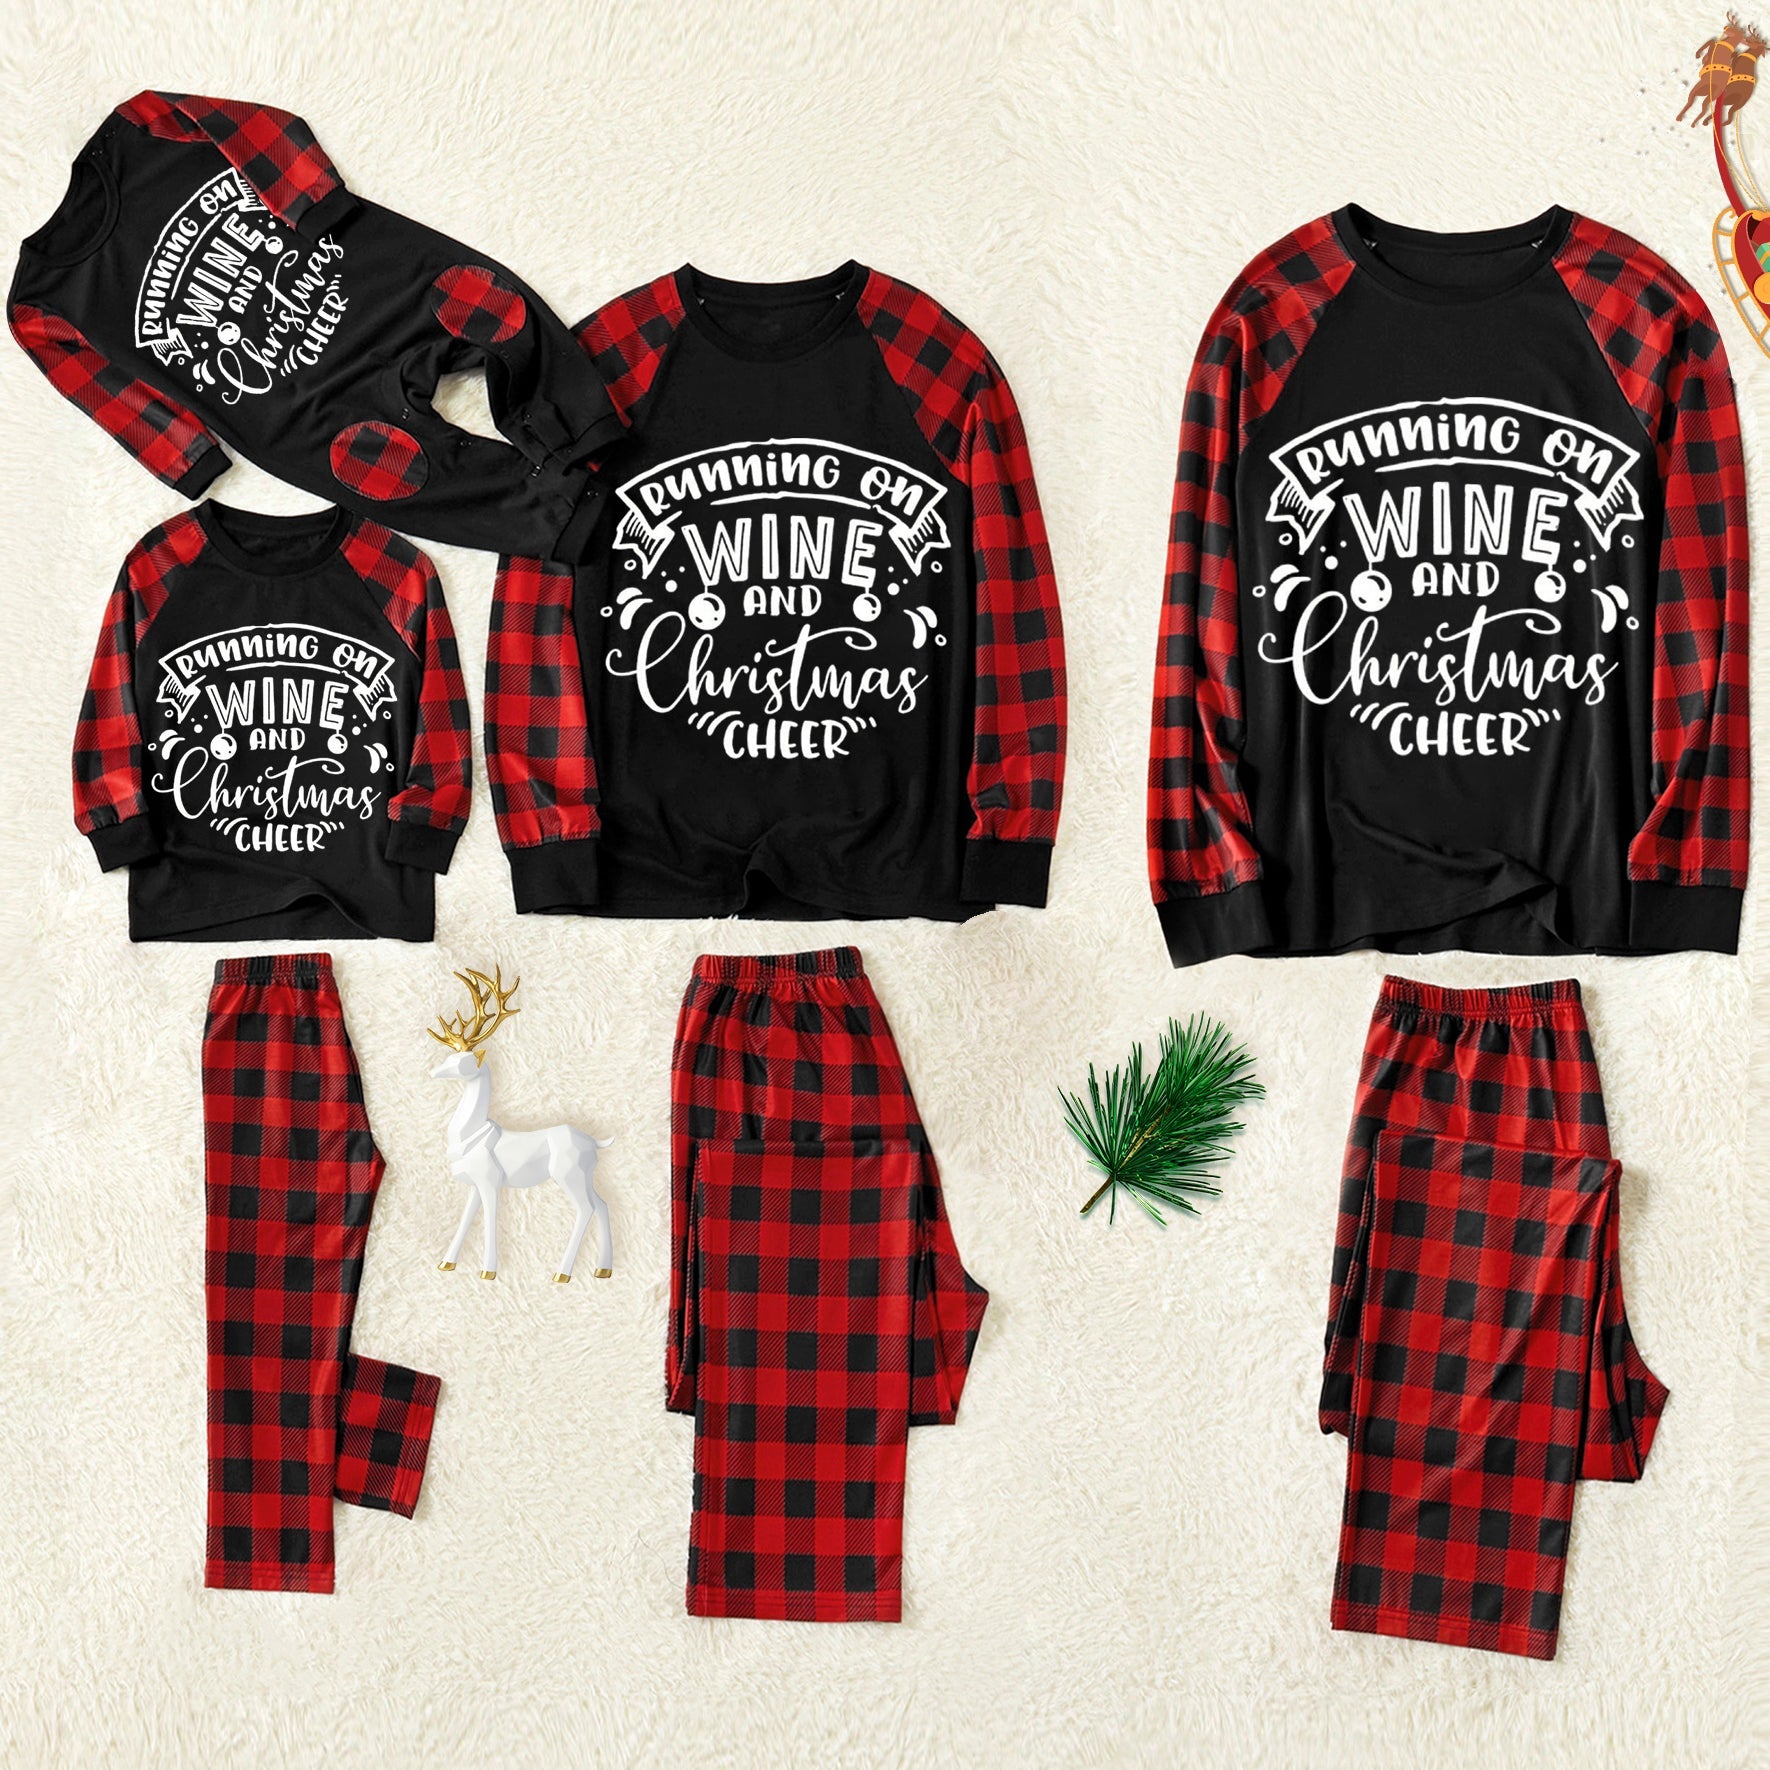 Christmas ”Running on Wine and Christmsa Cheer“ Letter Print Patterned Contrast Black top and Black & Red Plaid Pants Family Matching Pajamas Set With Dog Bandana